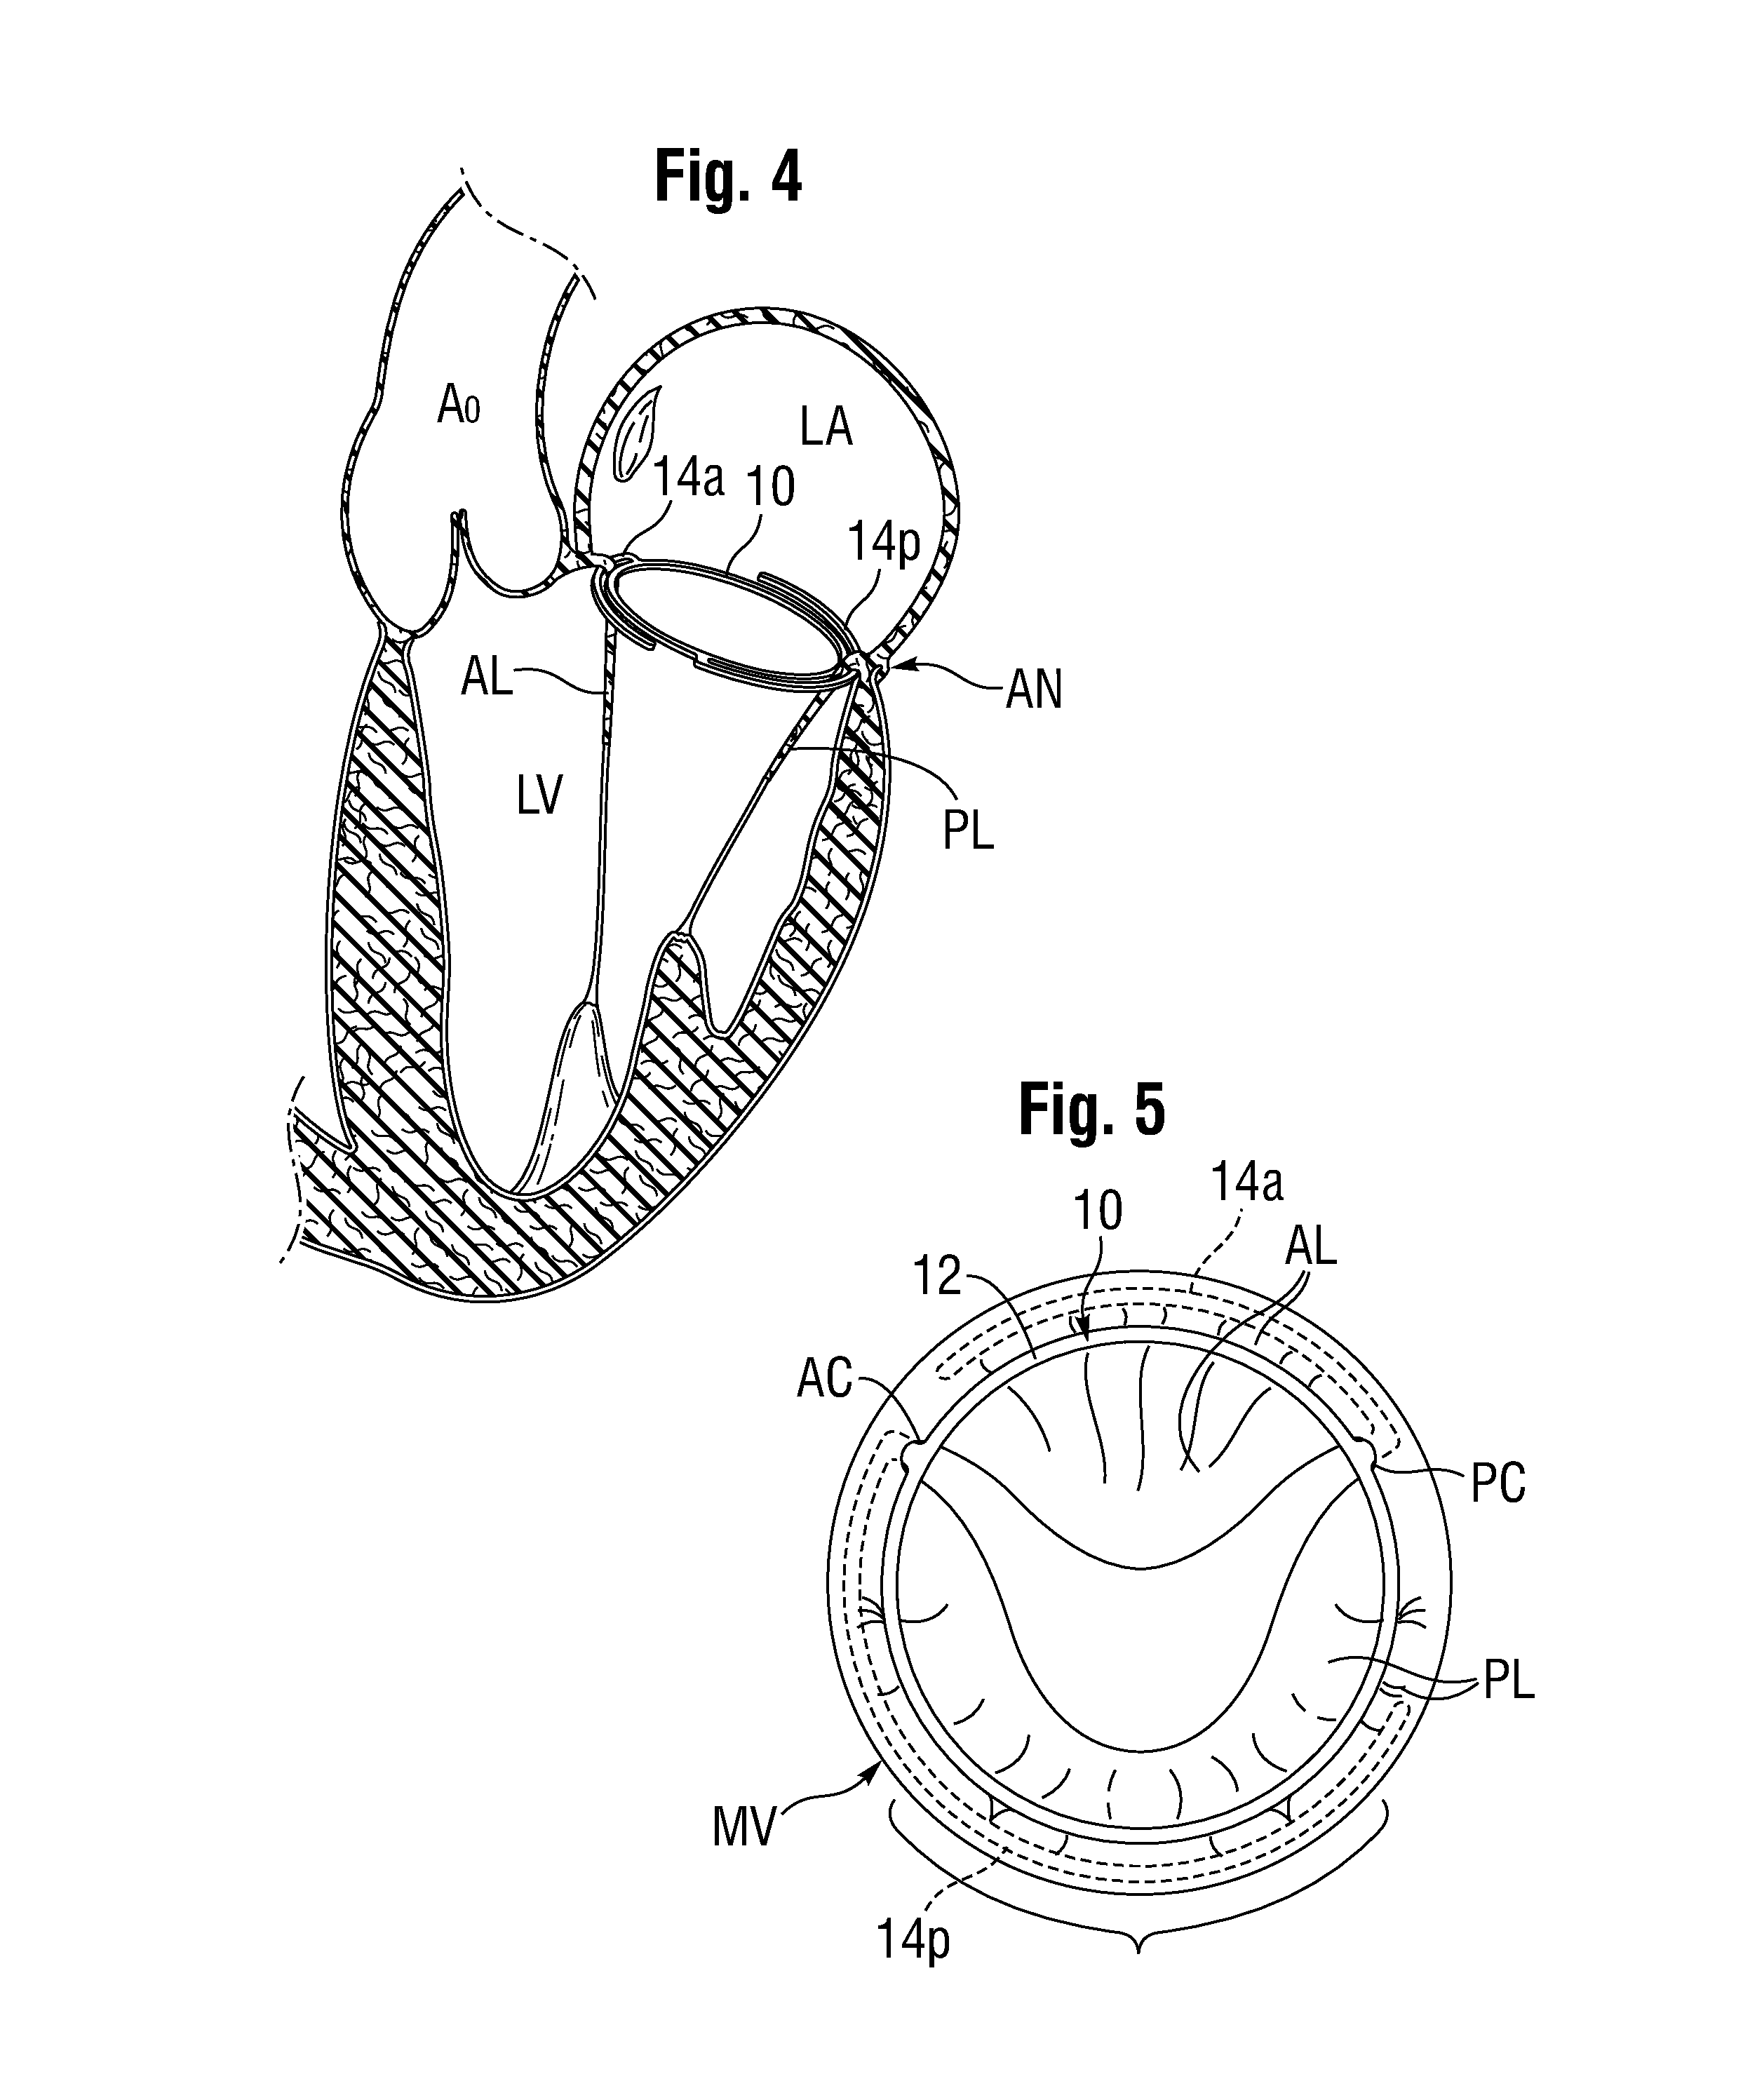 Anchoring device for replacing or repairing a heart valve